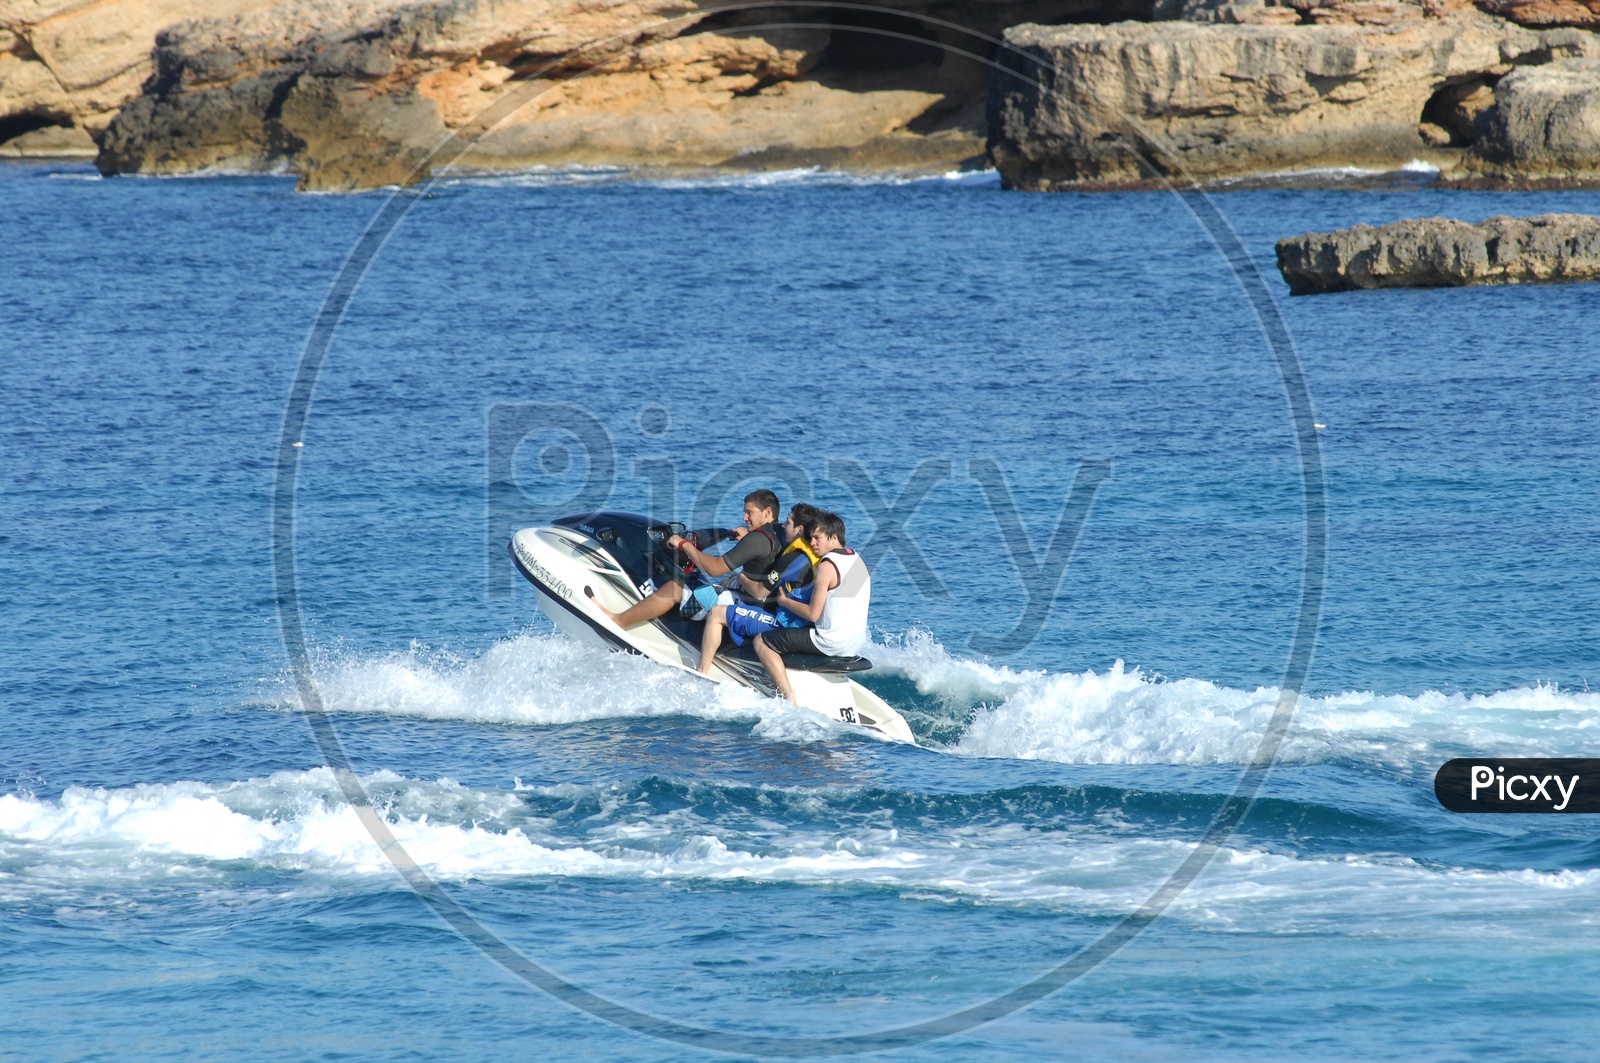 Foreign Men surfing on a Speed boat